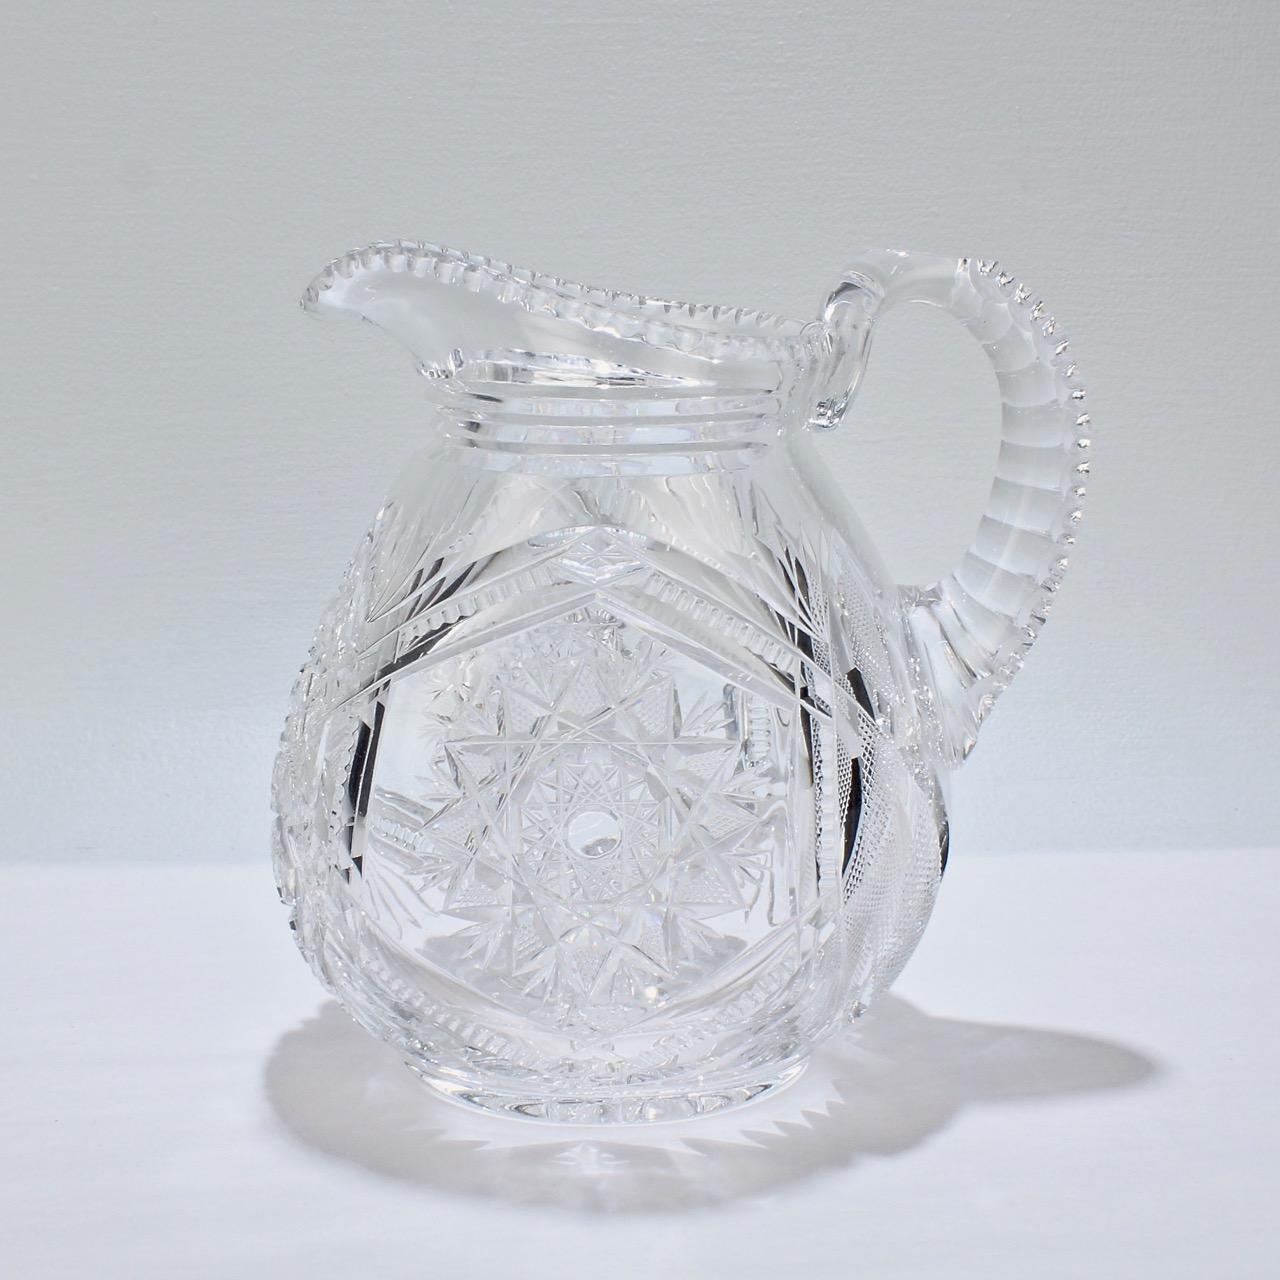 A very fine old or antique cut glass pitcher.

Possibly American in origin and dating as early as the American Brilliant Period. 

With deep wheel cut decoration, an atypically narrow body, and sturdy applied handle.

Simply a wonderful variant on